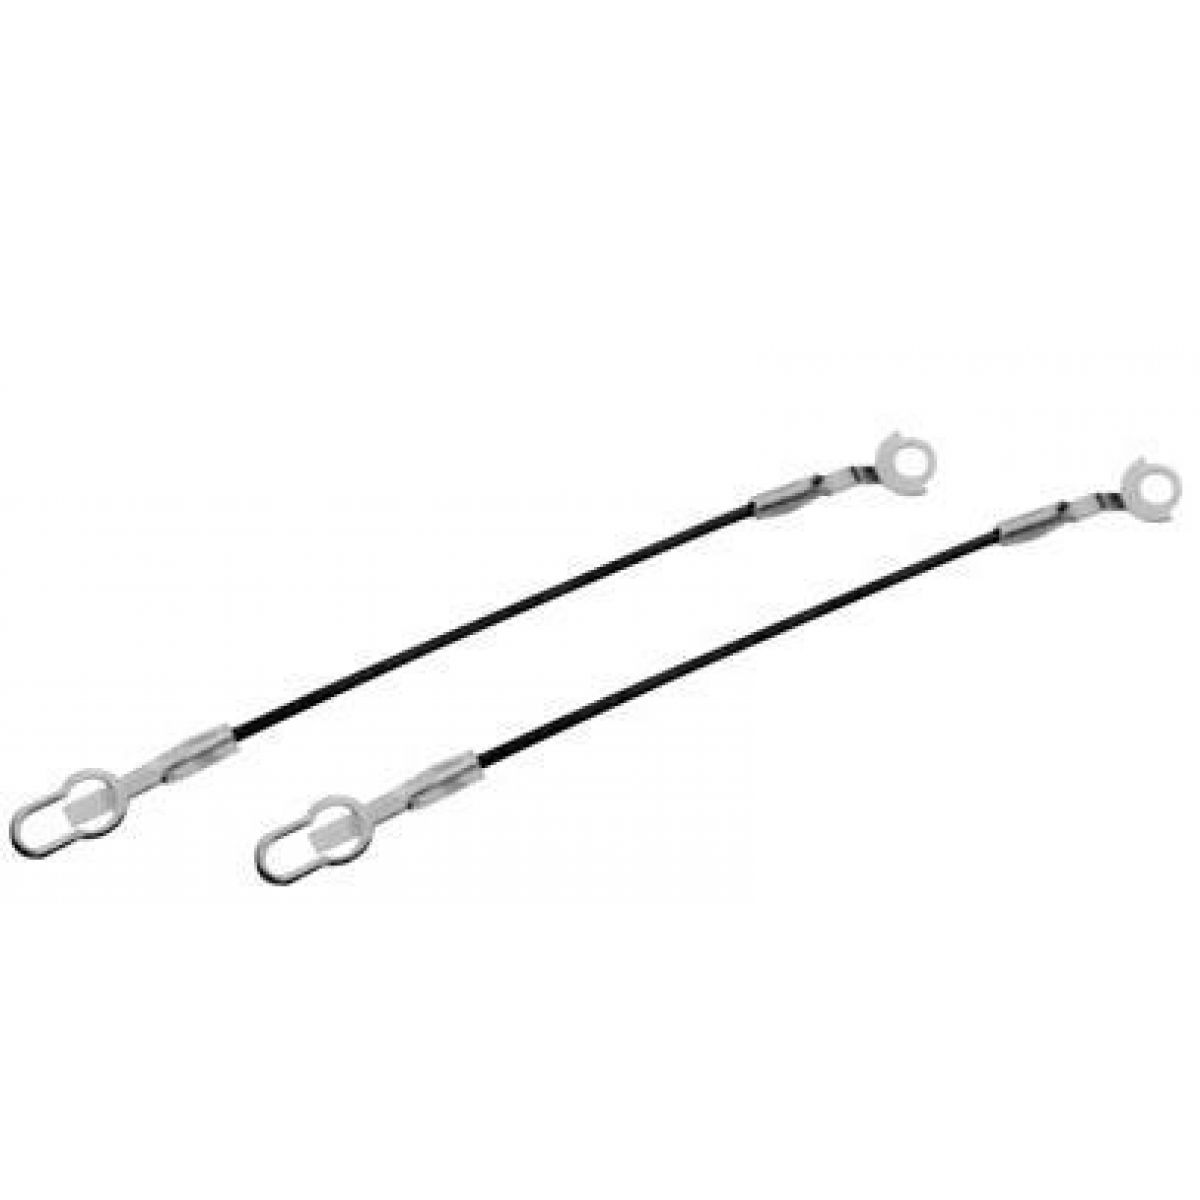 Ford ranger tailgate cables #8